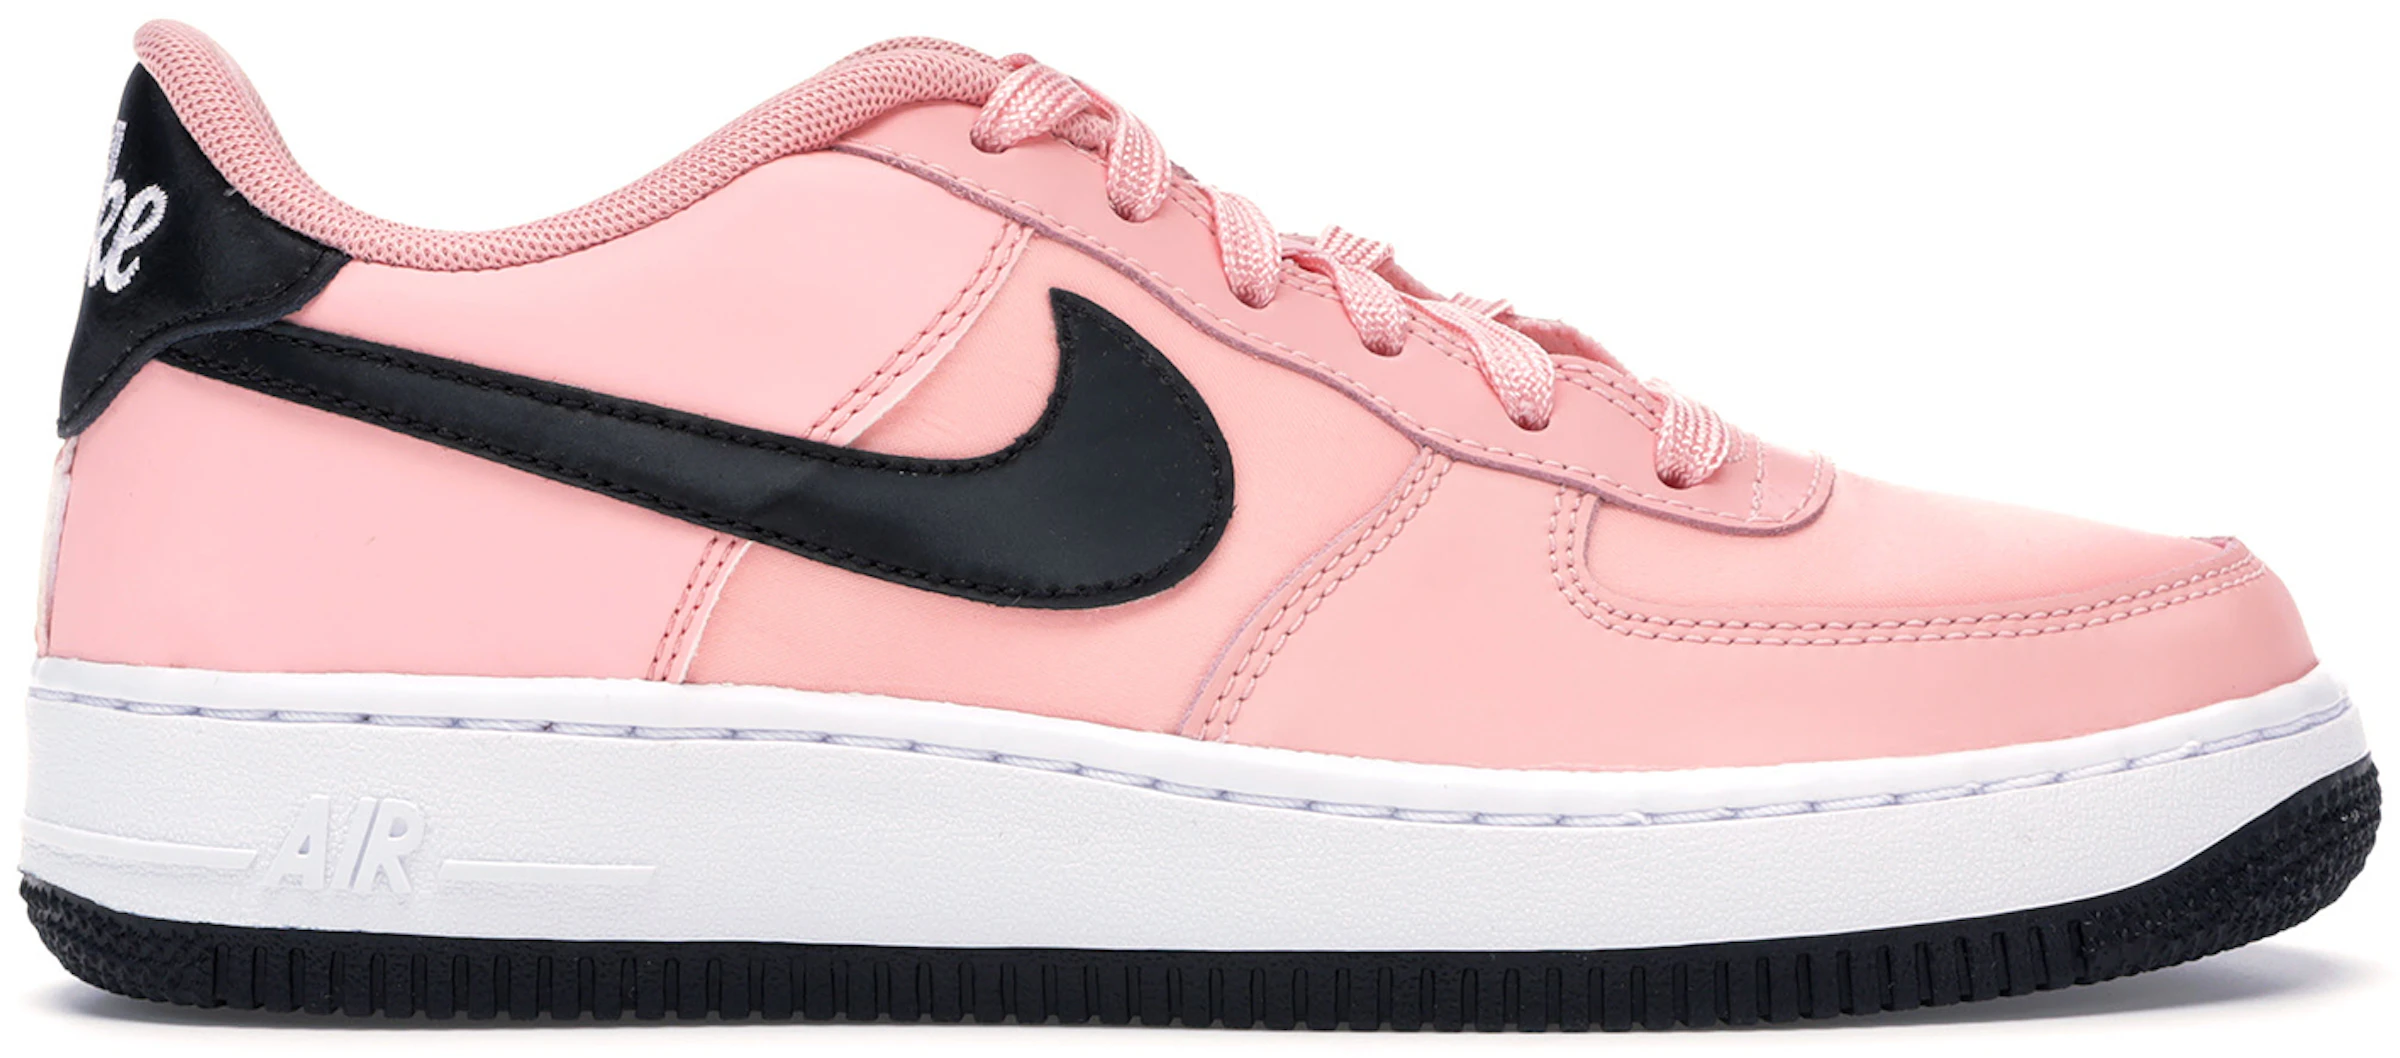 Nike Air Force 1 Low Valentine's Coral (2019) (GS) - BQ6980-600 - US